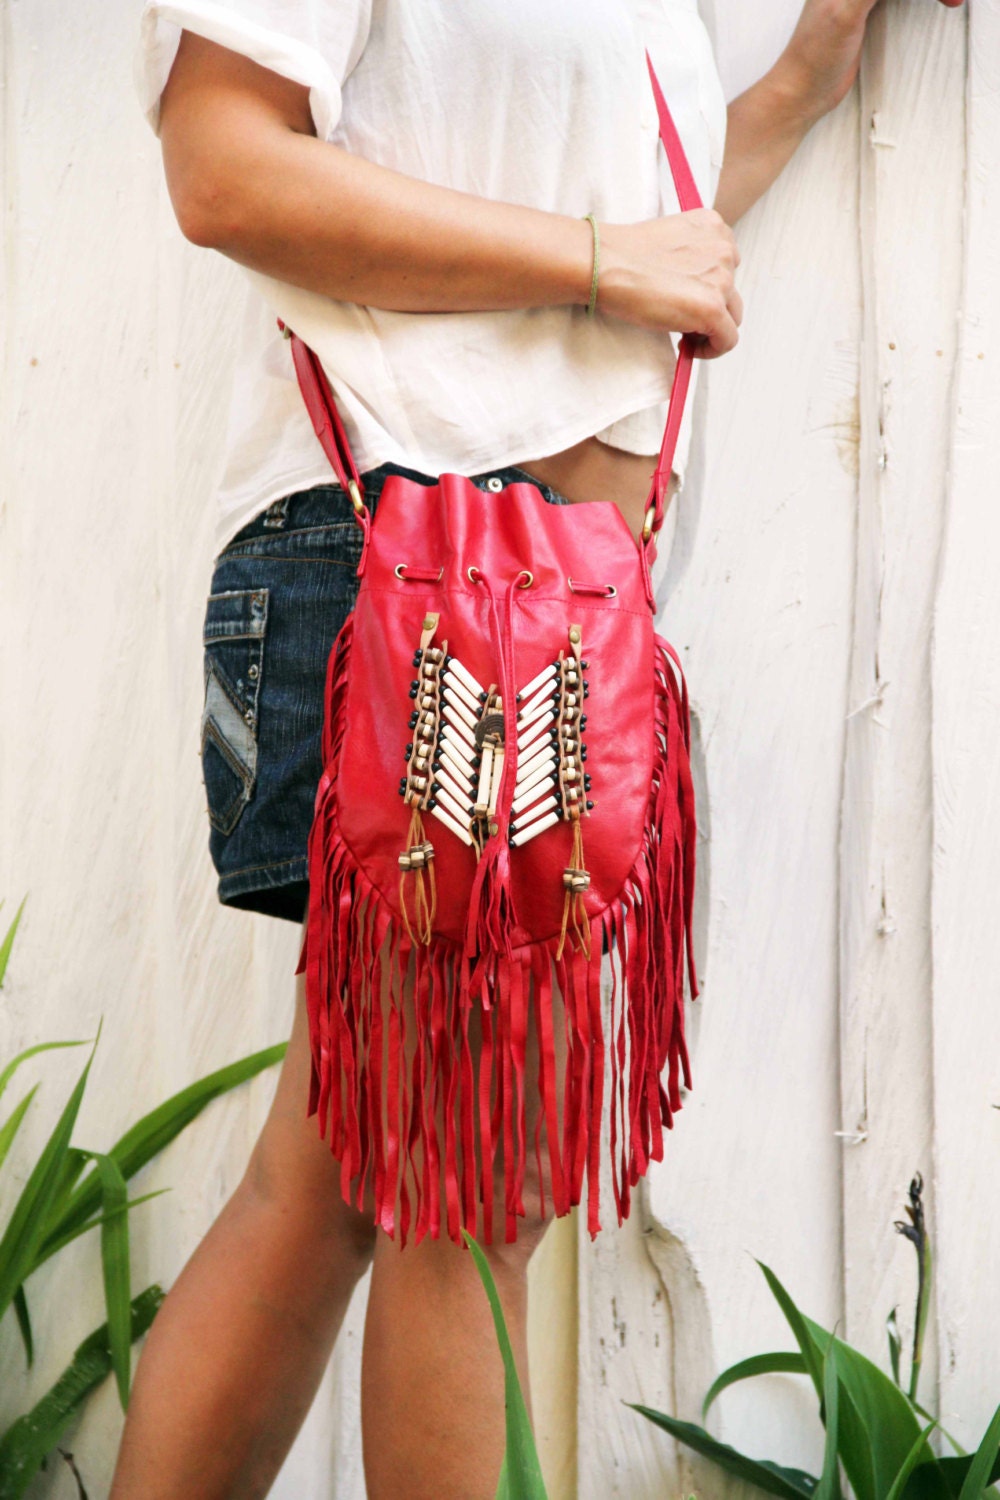 Boho Womens Red Leather Fringe Handbags Purse Small Shoulder Bag for Women, Red